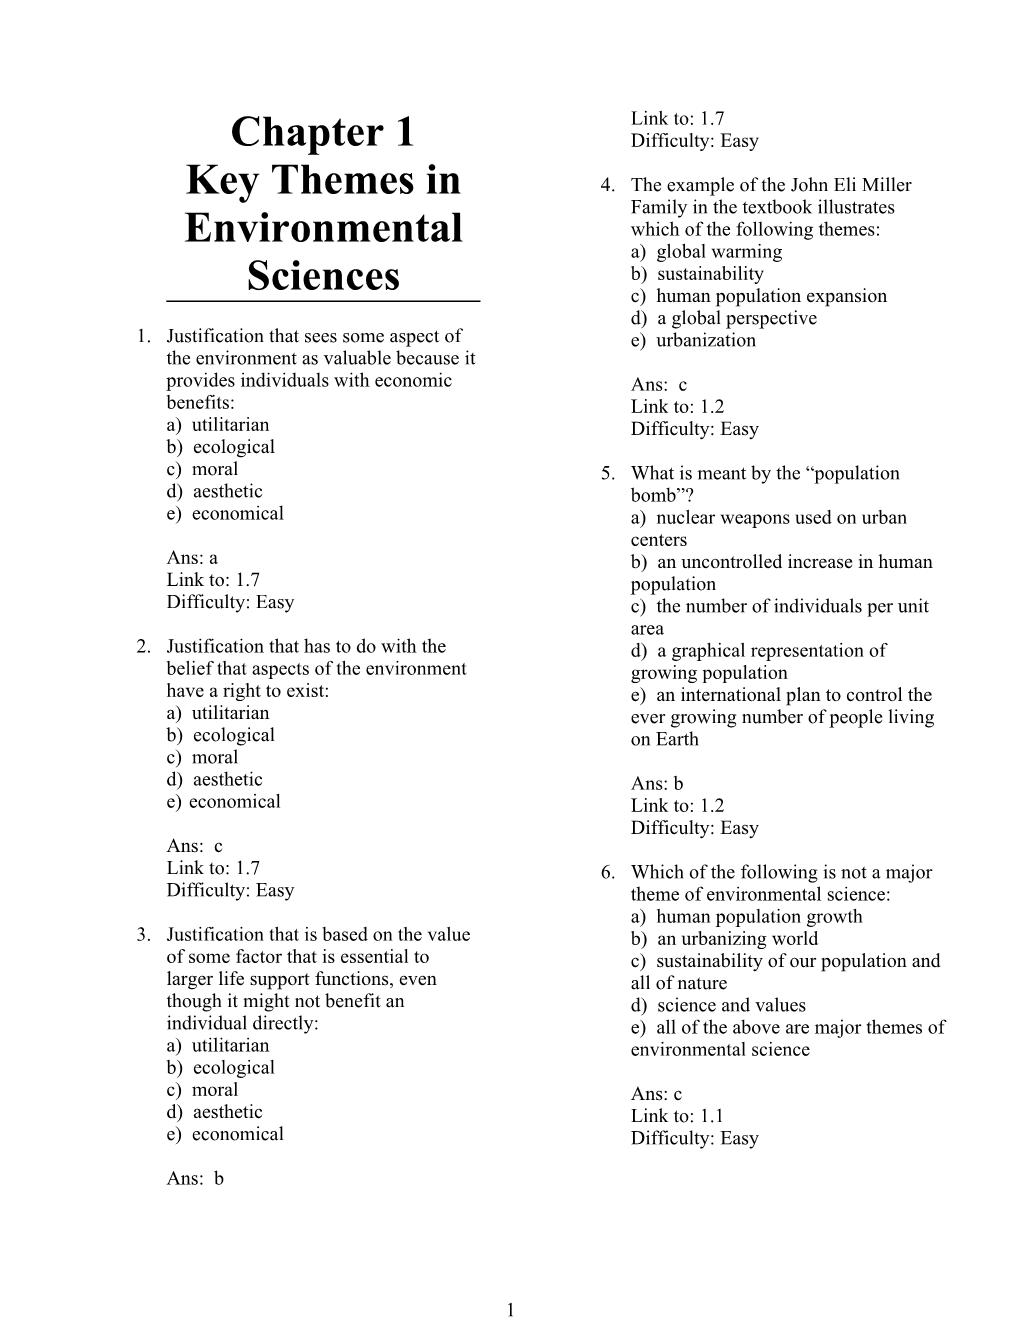 Chapter 1, Key Themes in Environmental Sciences